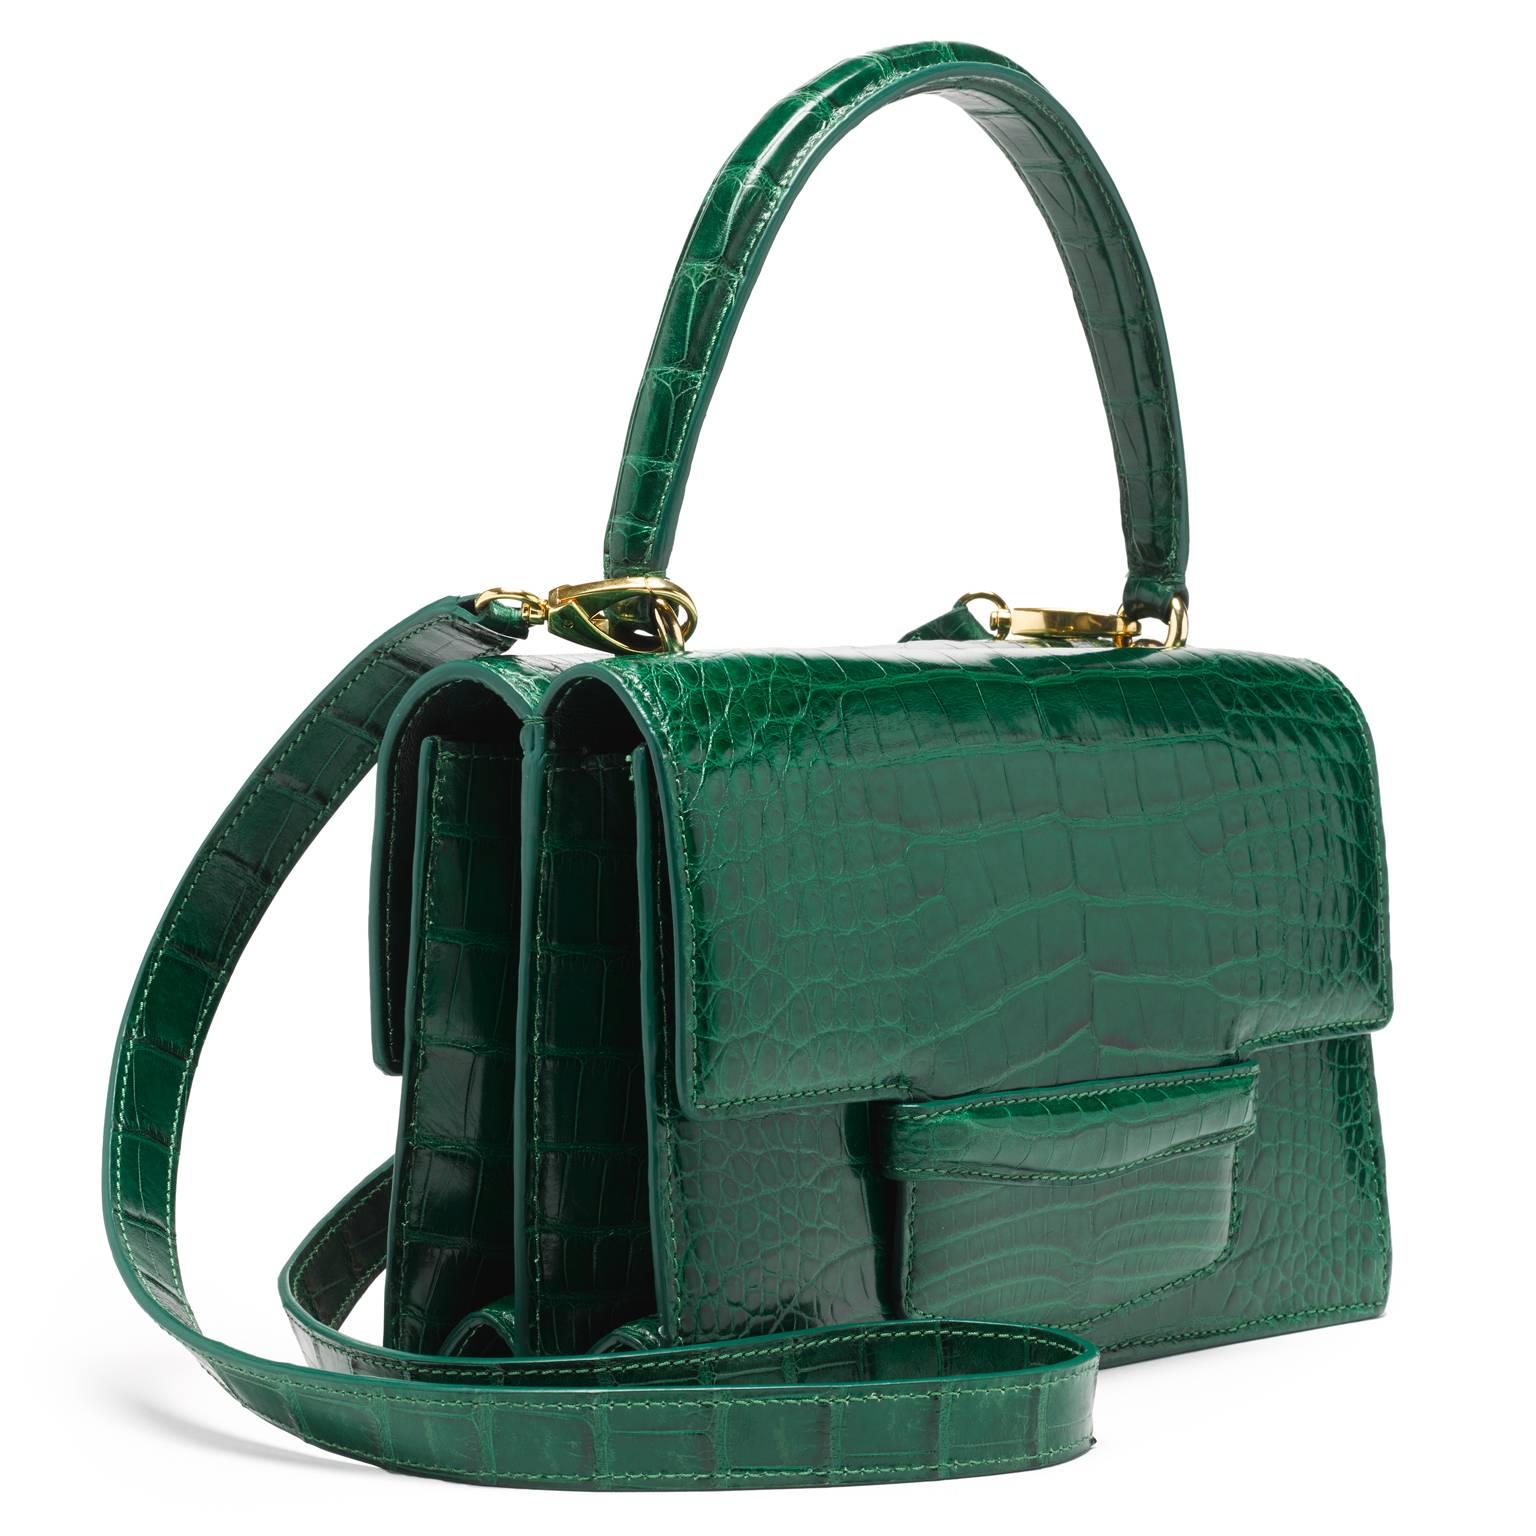 This double gusseted alligator bag is fully lined in leather. A stitched doubled sided handle is joined to the bag with interlocking gold rings. There is an additional 40” detachable shoulder strap. 

- one exterior pocket in center of the bag 
-